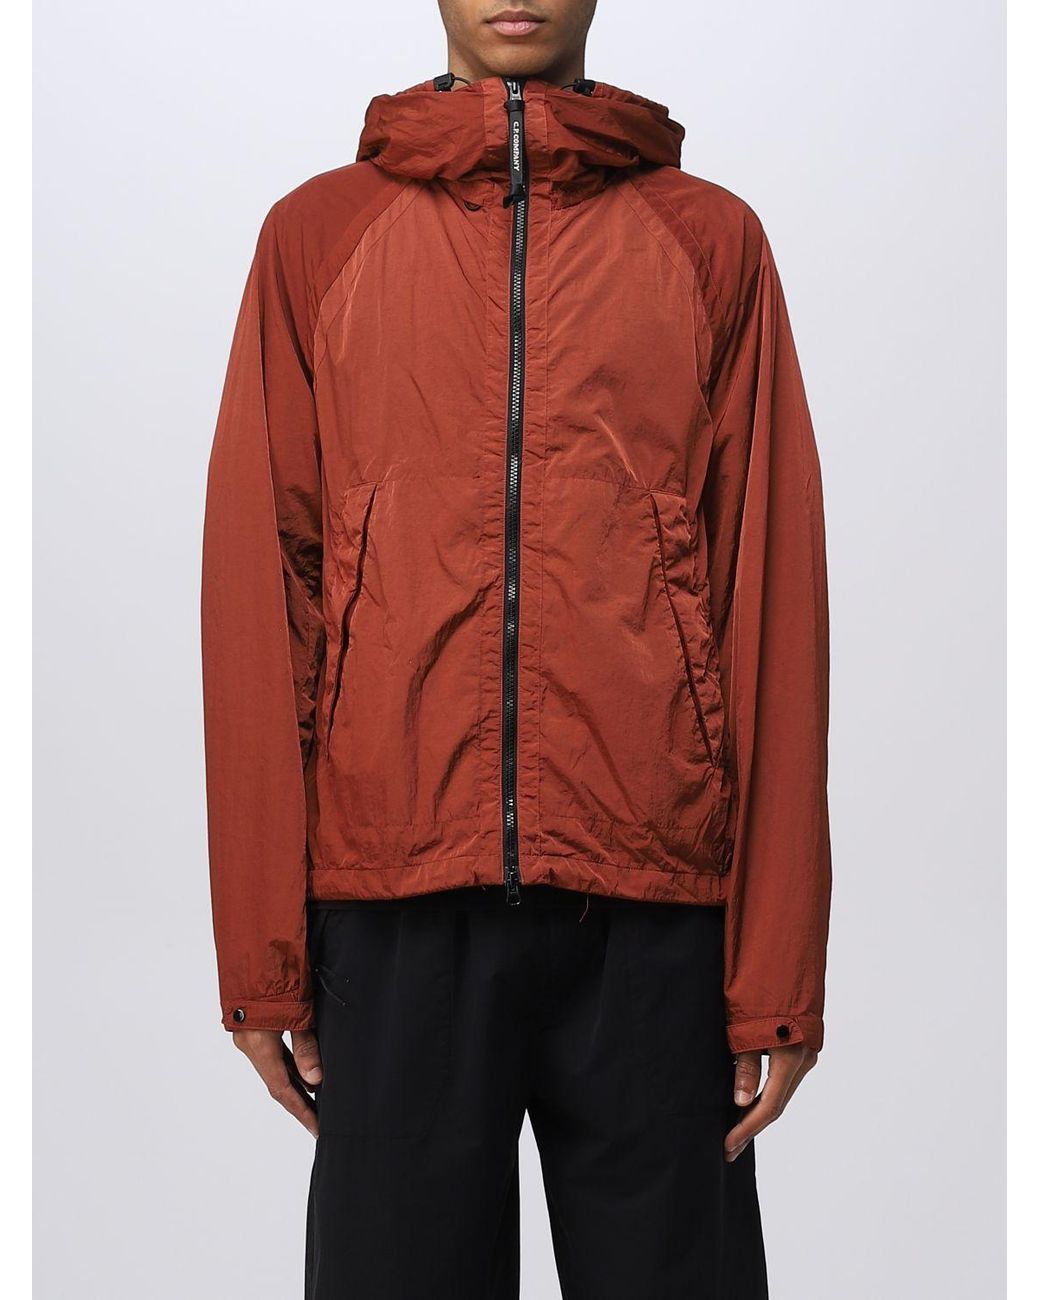 C.P. Company Jacket in Red for Men | Lyst